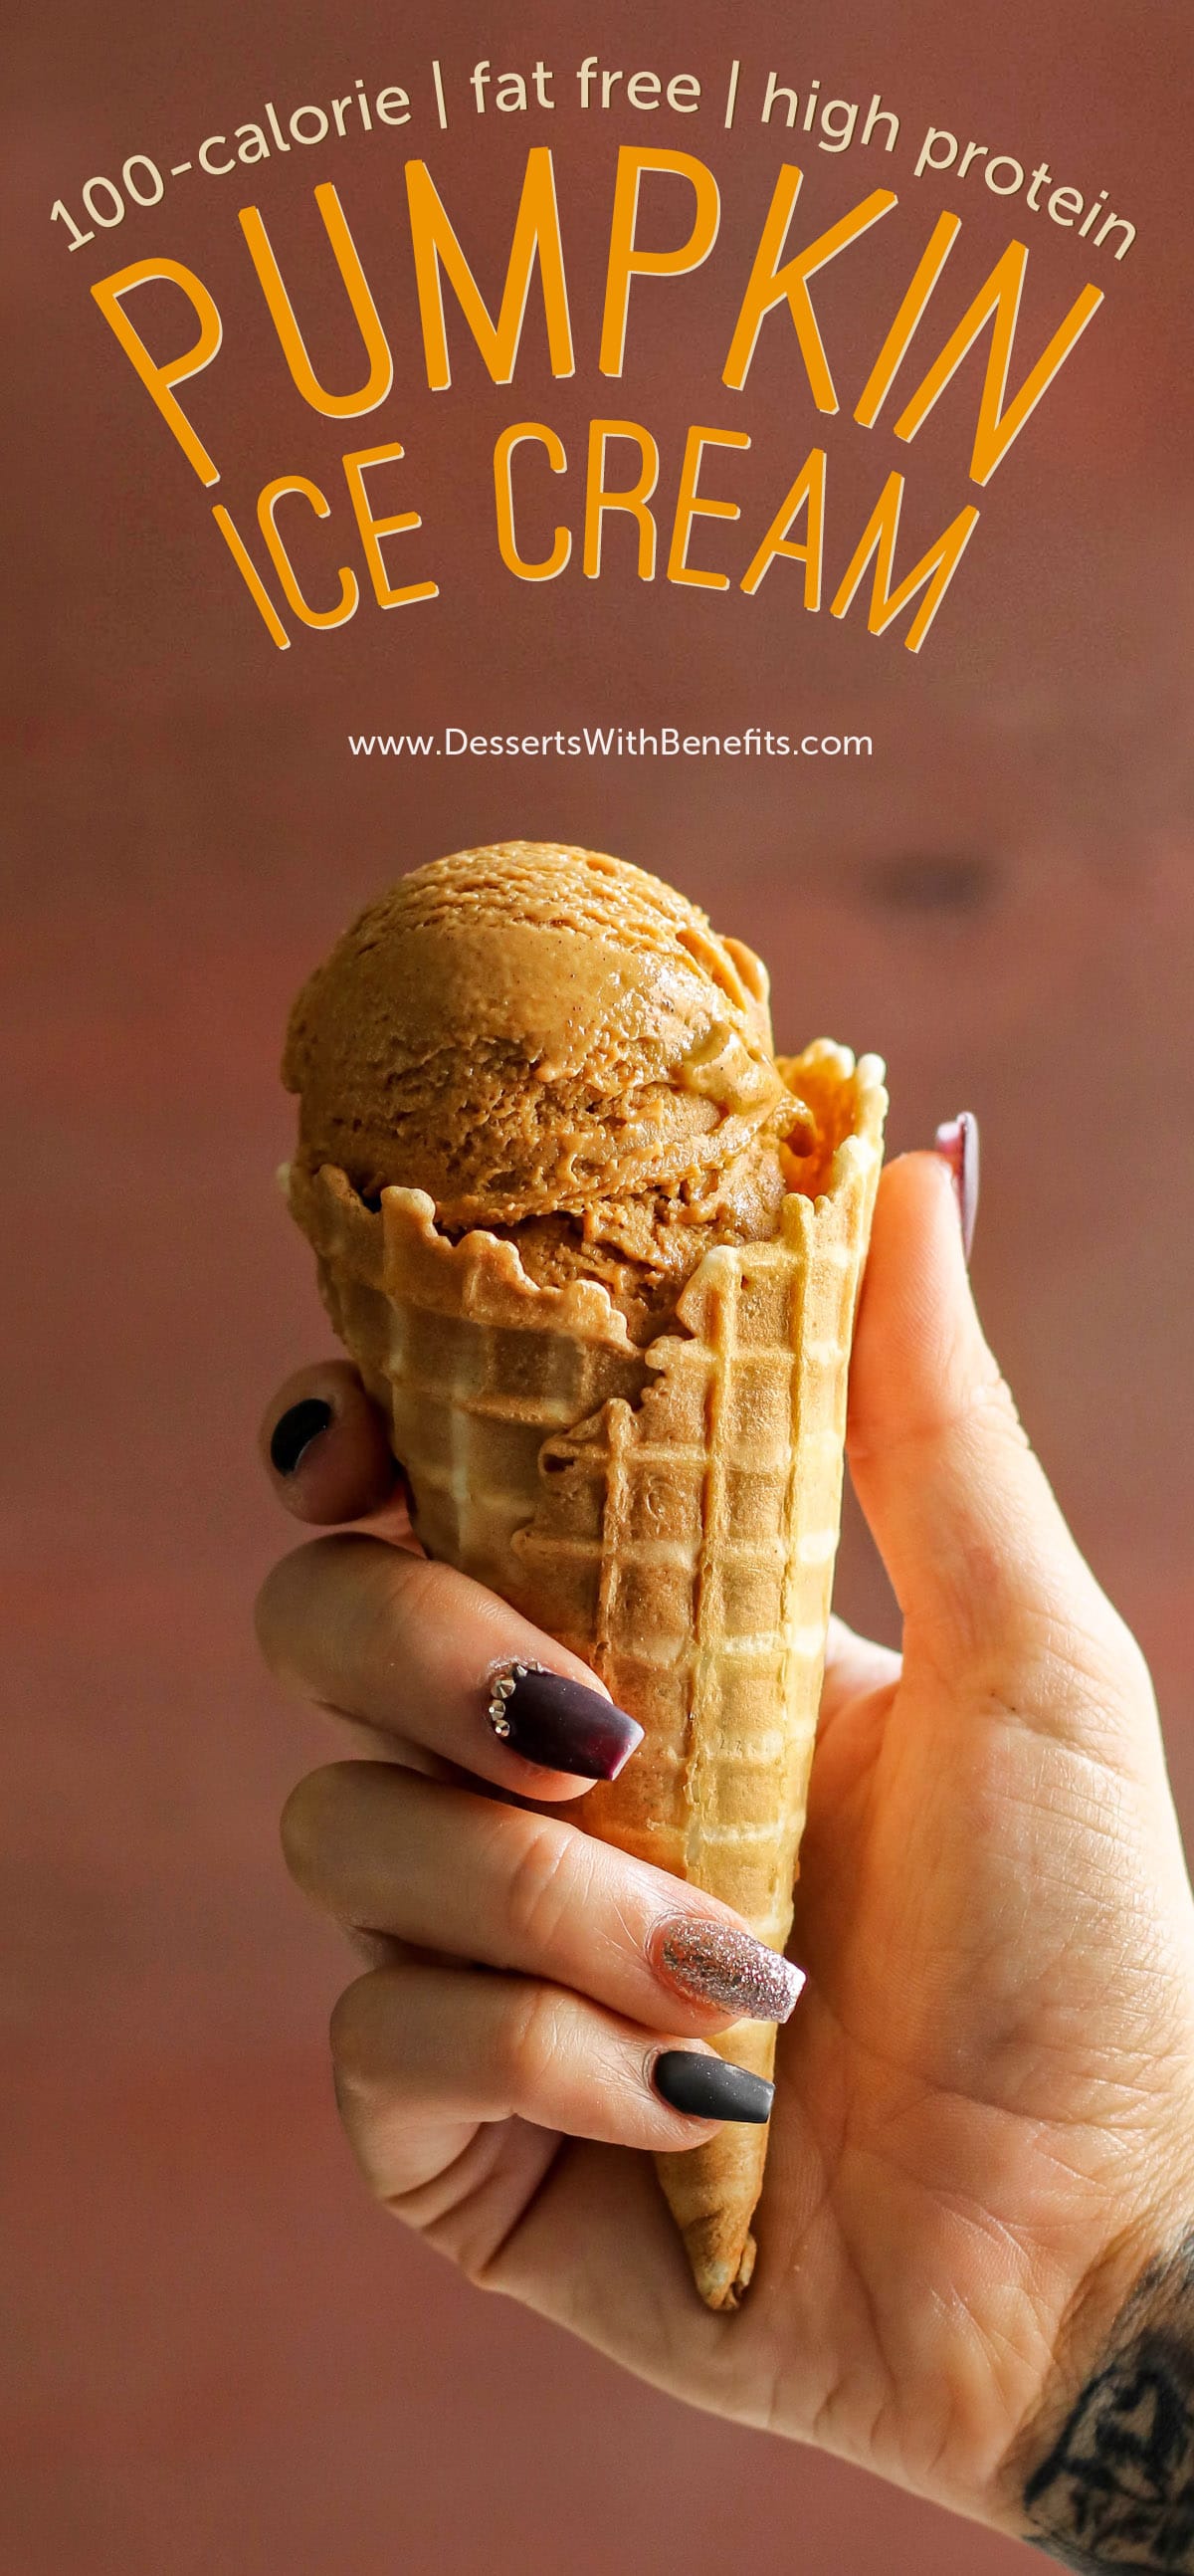 This 100-calorie Pumpkin Ice Cream is ULTRA creamy, perfectly spiced, and perfectly sweet. Made with 100% good-for-you ingredients (NO heavy cream, no eggs, and no refined sugar)! This version is fat free, refined sugar free, high protein, and gluten free too! #pumpkin #pumpkinpiespice #allnatural #refinedsugarfree #healthyicecream #highprotein #fatfree #easy #homemadeicecream